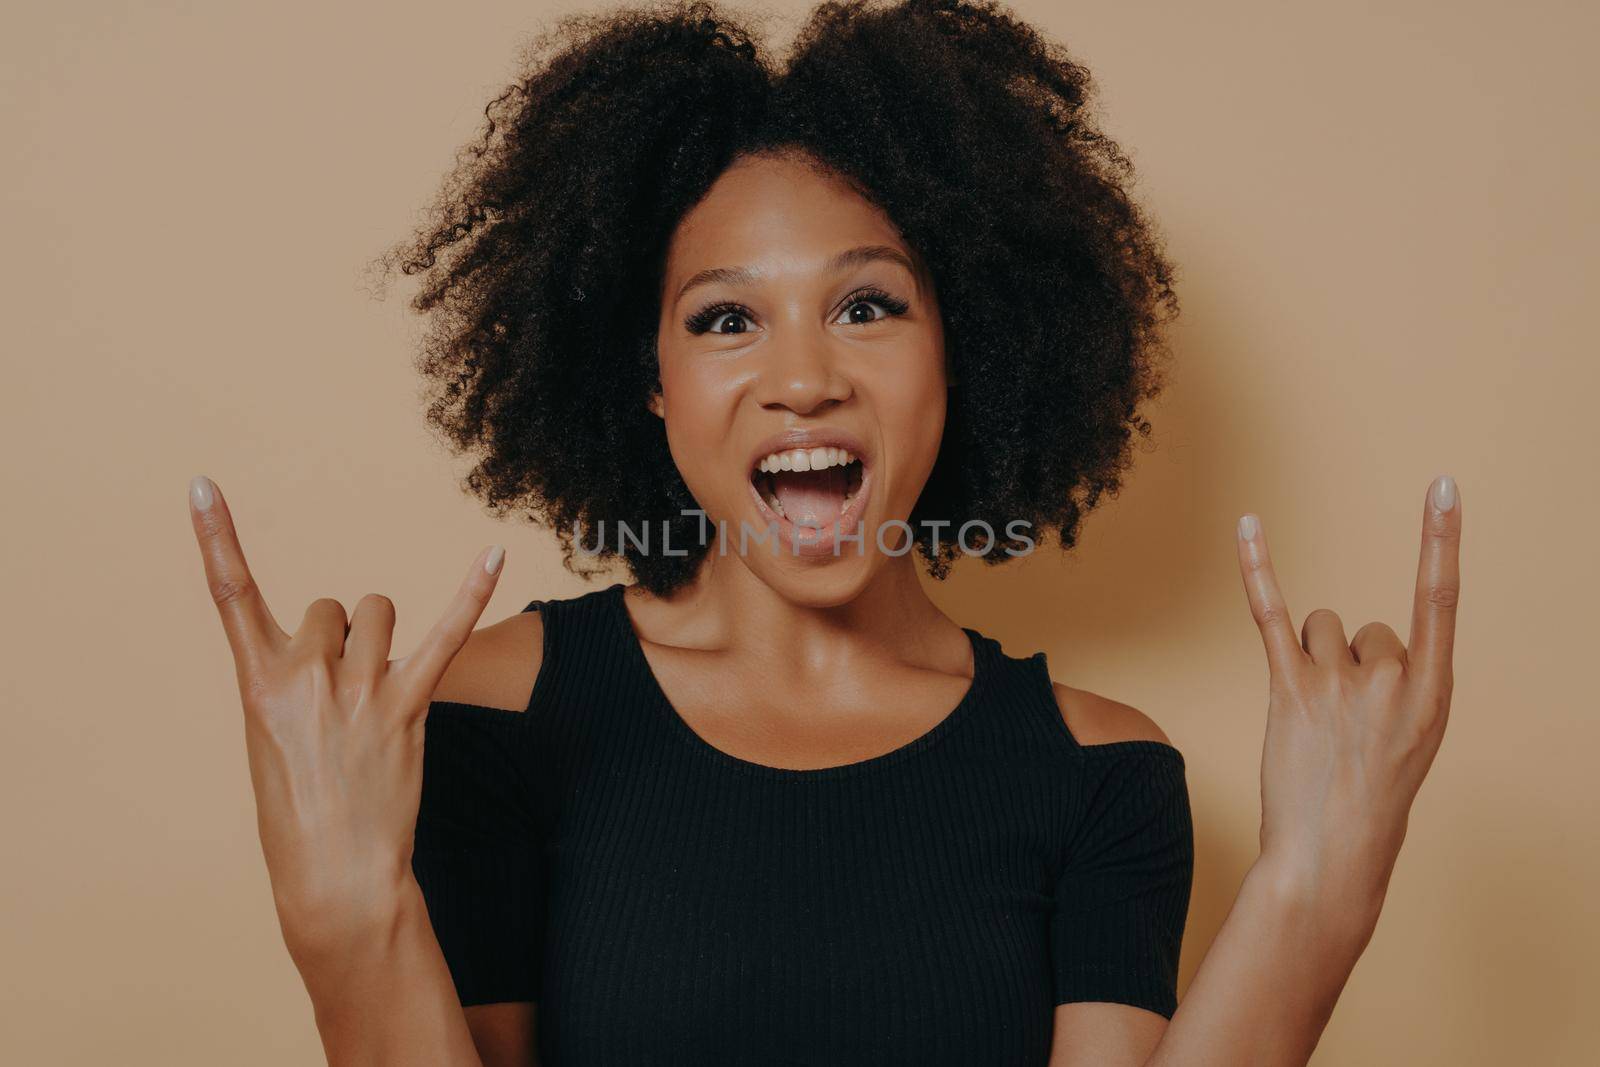 Young woman wearing black tshirt shouting with crazy facial expression doing rock-n-roll symbol by vkstock